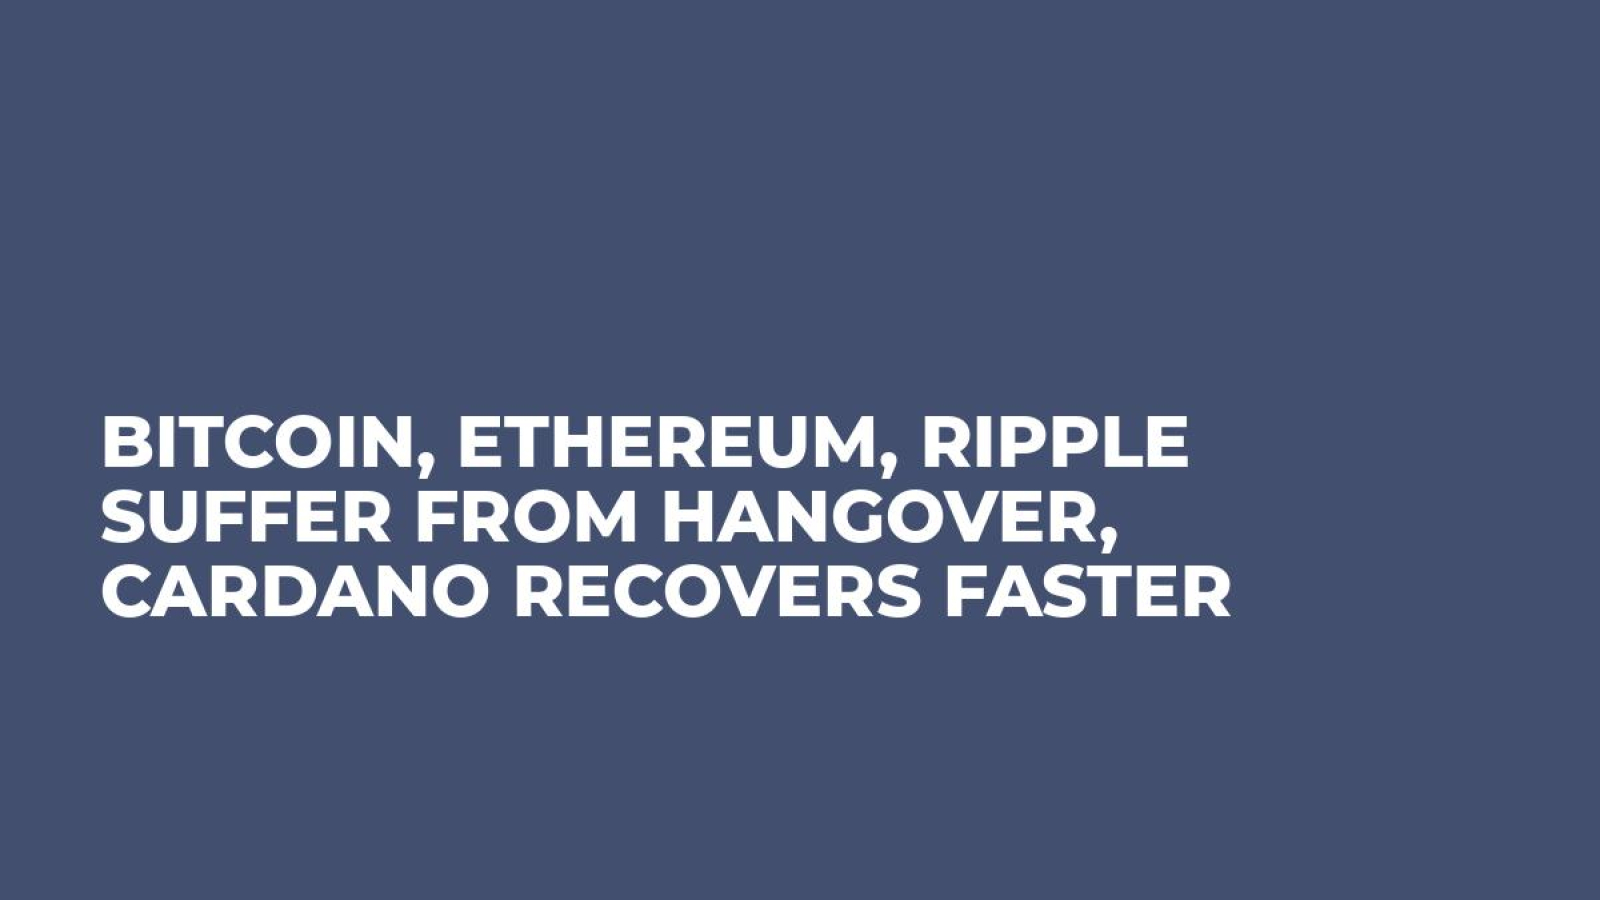 Bitcoin, Ethereum, Ripple Suffer From Hangover, Cardano Recovers Faster